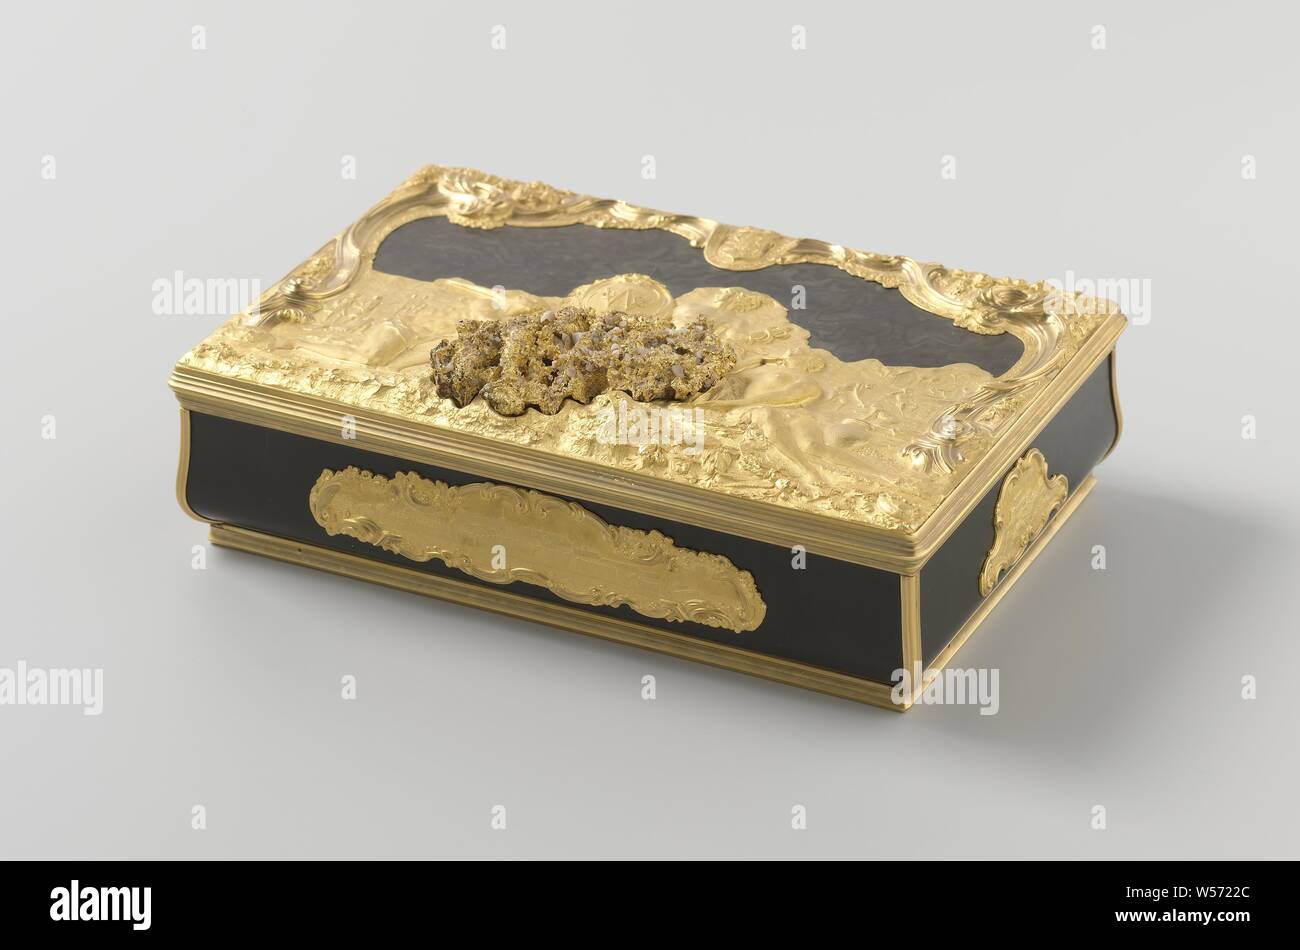 Box of the Dutch West India Company, The trade of the West India Company in Africa, Rectangular box of turtle and gold, The rectangular box, with rounded corners, has a loose lid. Bottom, walls and lid are made of turtle, set in profiled golden edges. The lid contains a gold nugget with white stones, around which a scene with Mercury as the God of Commerce in the center, on the right a woman washing gold with on her right a scene with gold diggers, and on the left a man wearing an elephant stand, with a scene on his left on the coast depicting the trade in slaves. In the middle at the top Stock Photo